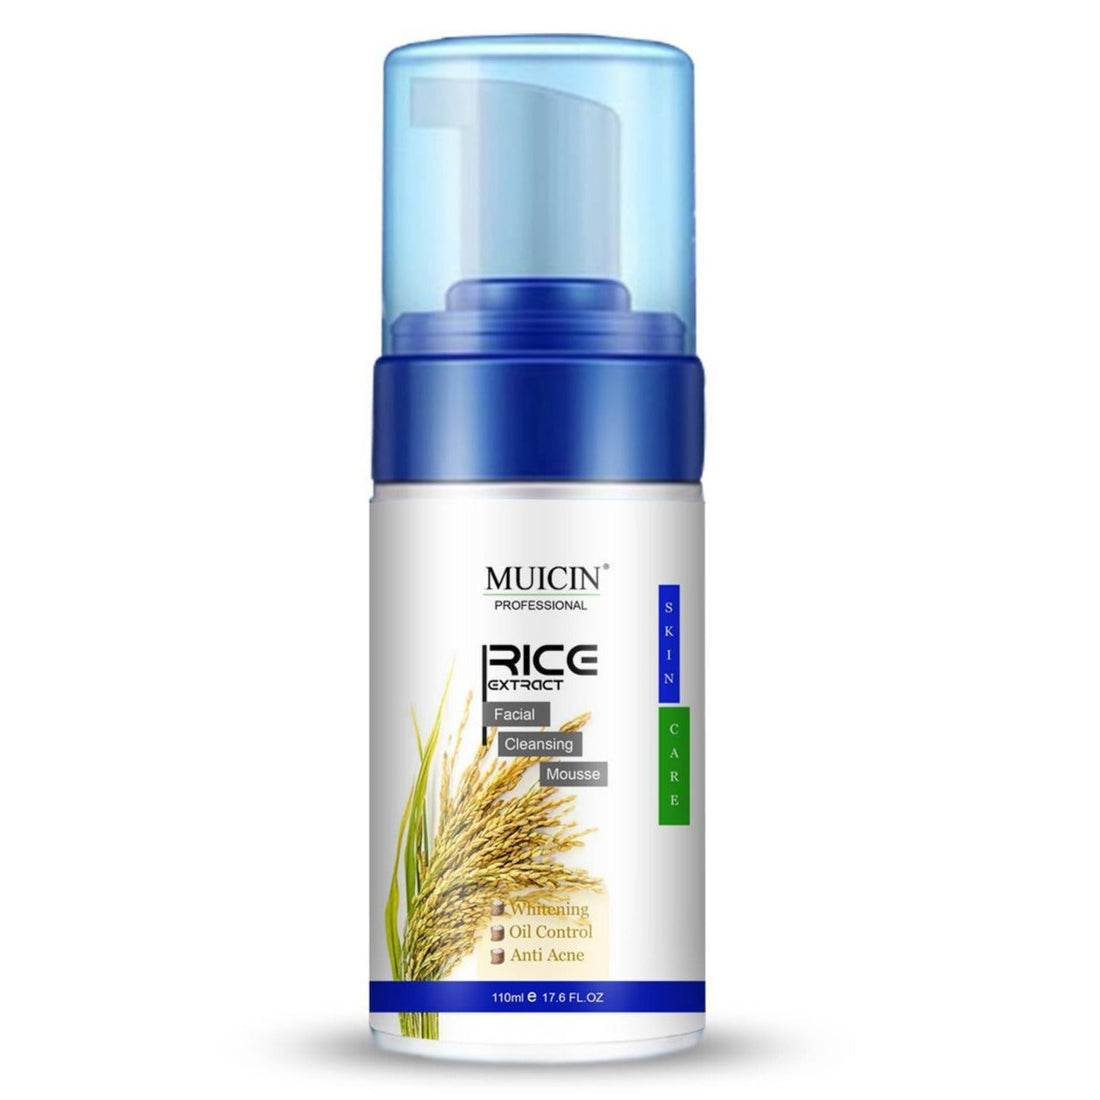 RICE EXTRACT FACIAL CLEANSING MOUSSE - SOFT RADIANT CLEANSE